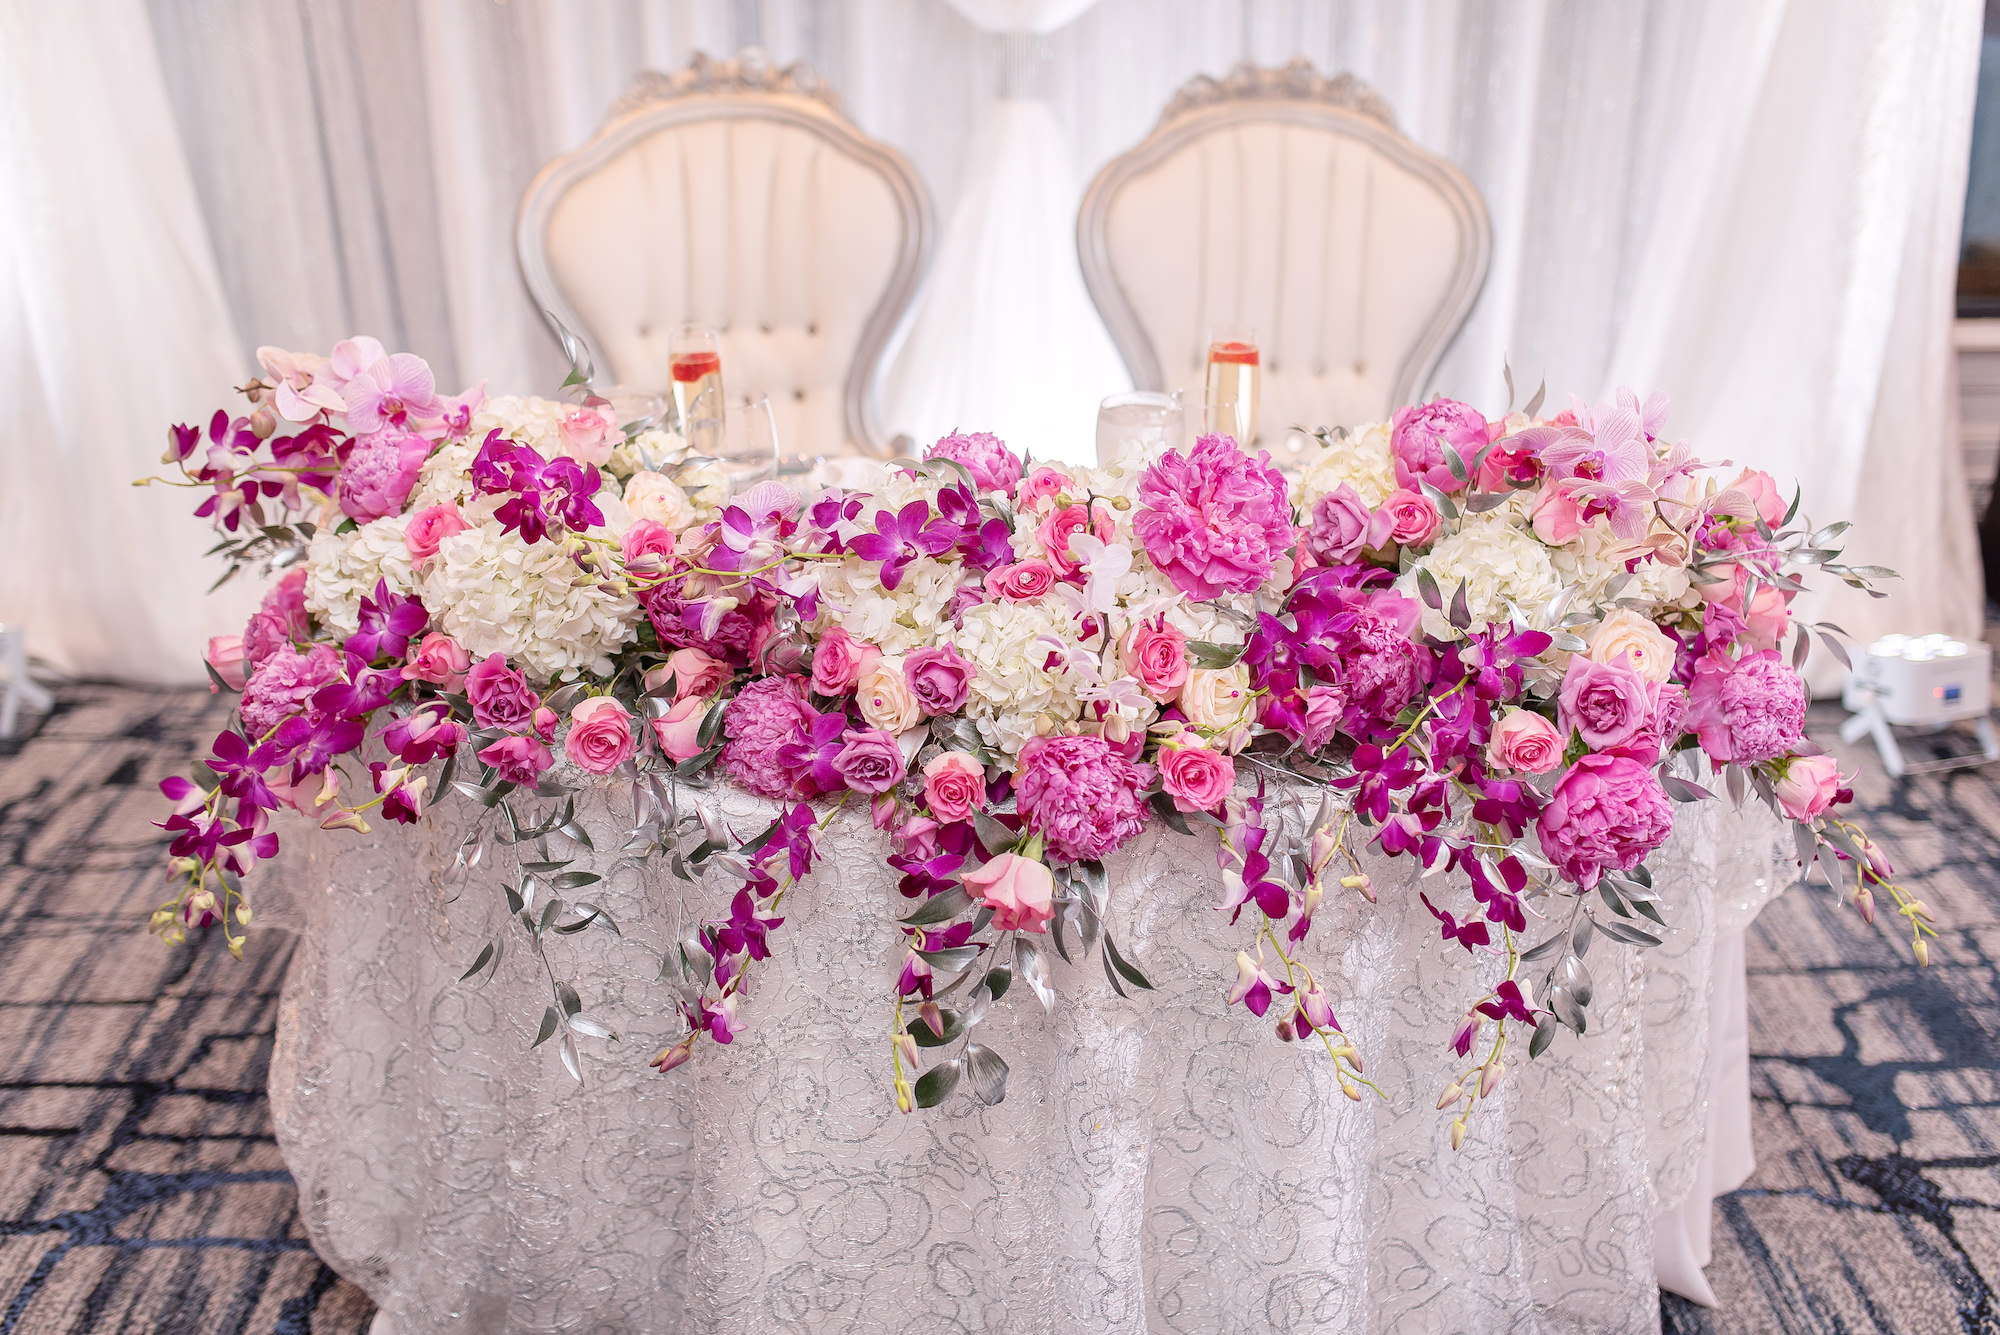 White Draping Reception Sweetheart Table with Bright Pink Floral Tablescape | Tampa Rentals A Chair Affair Event Rentals